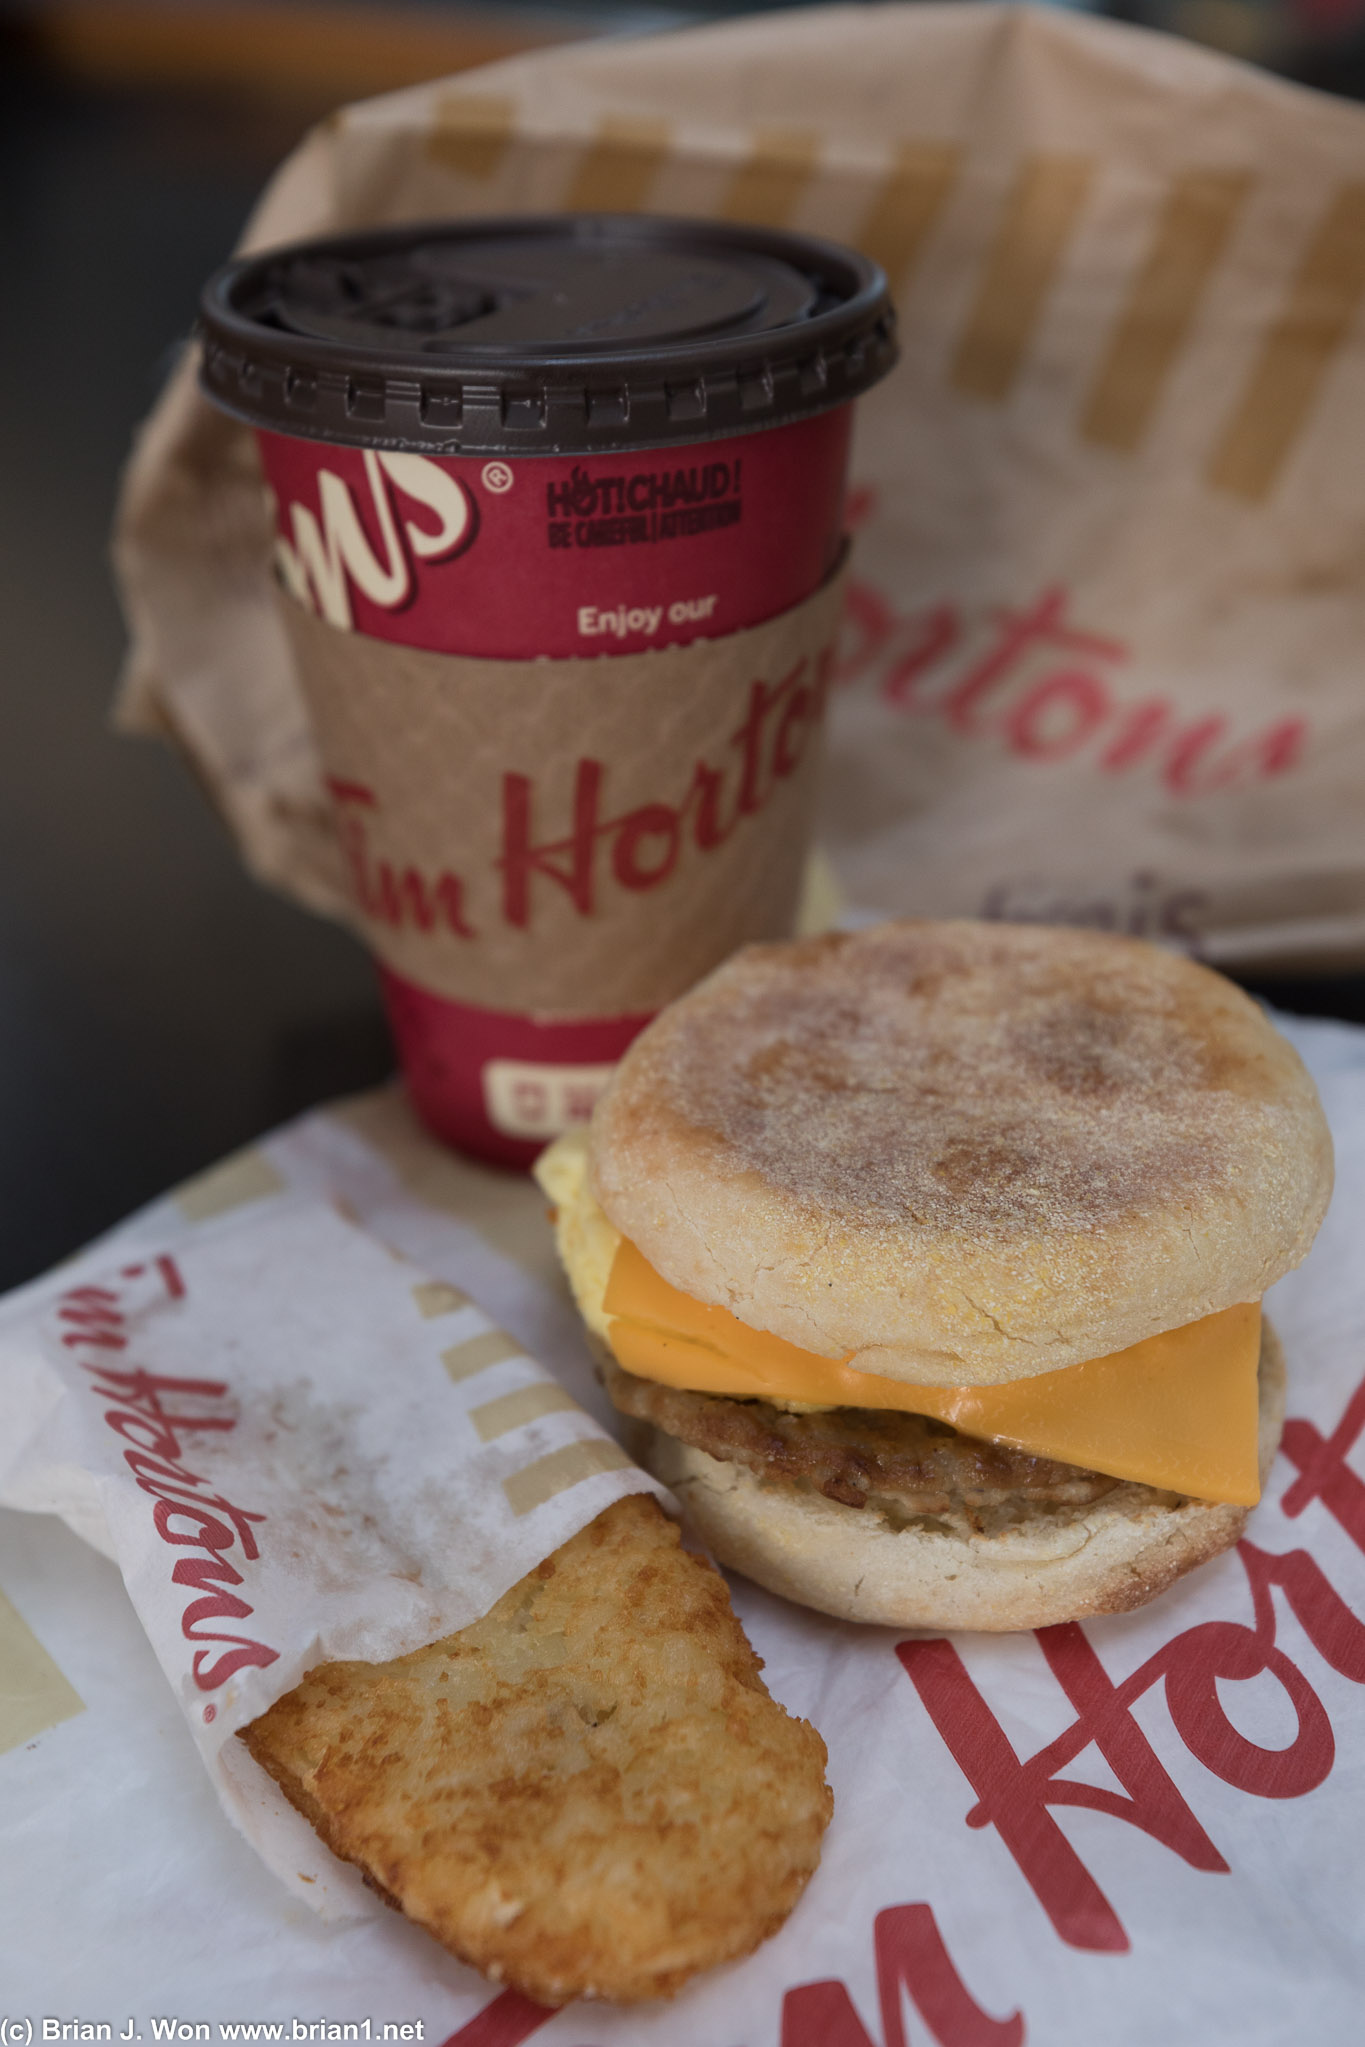 Don't get the breakfast sandwich. Or the hash browns.